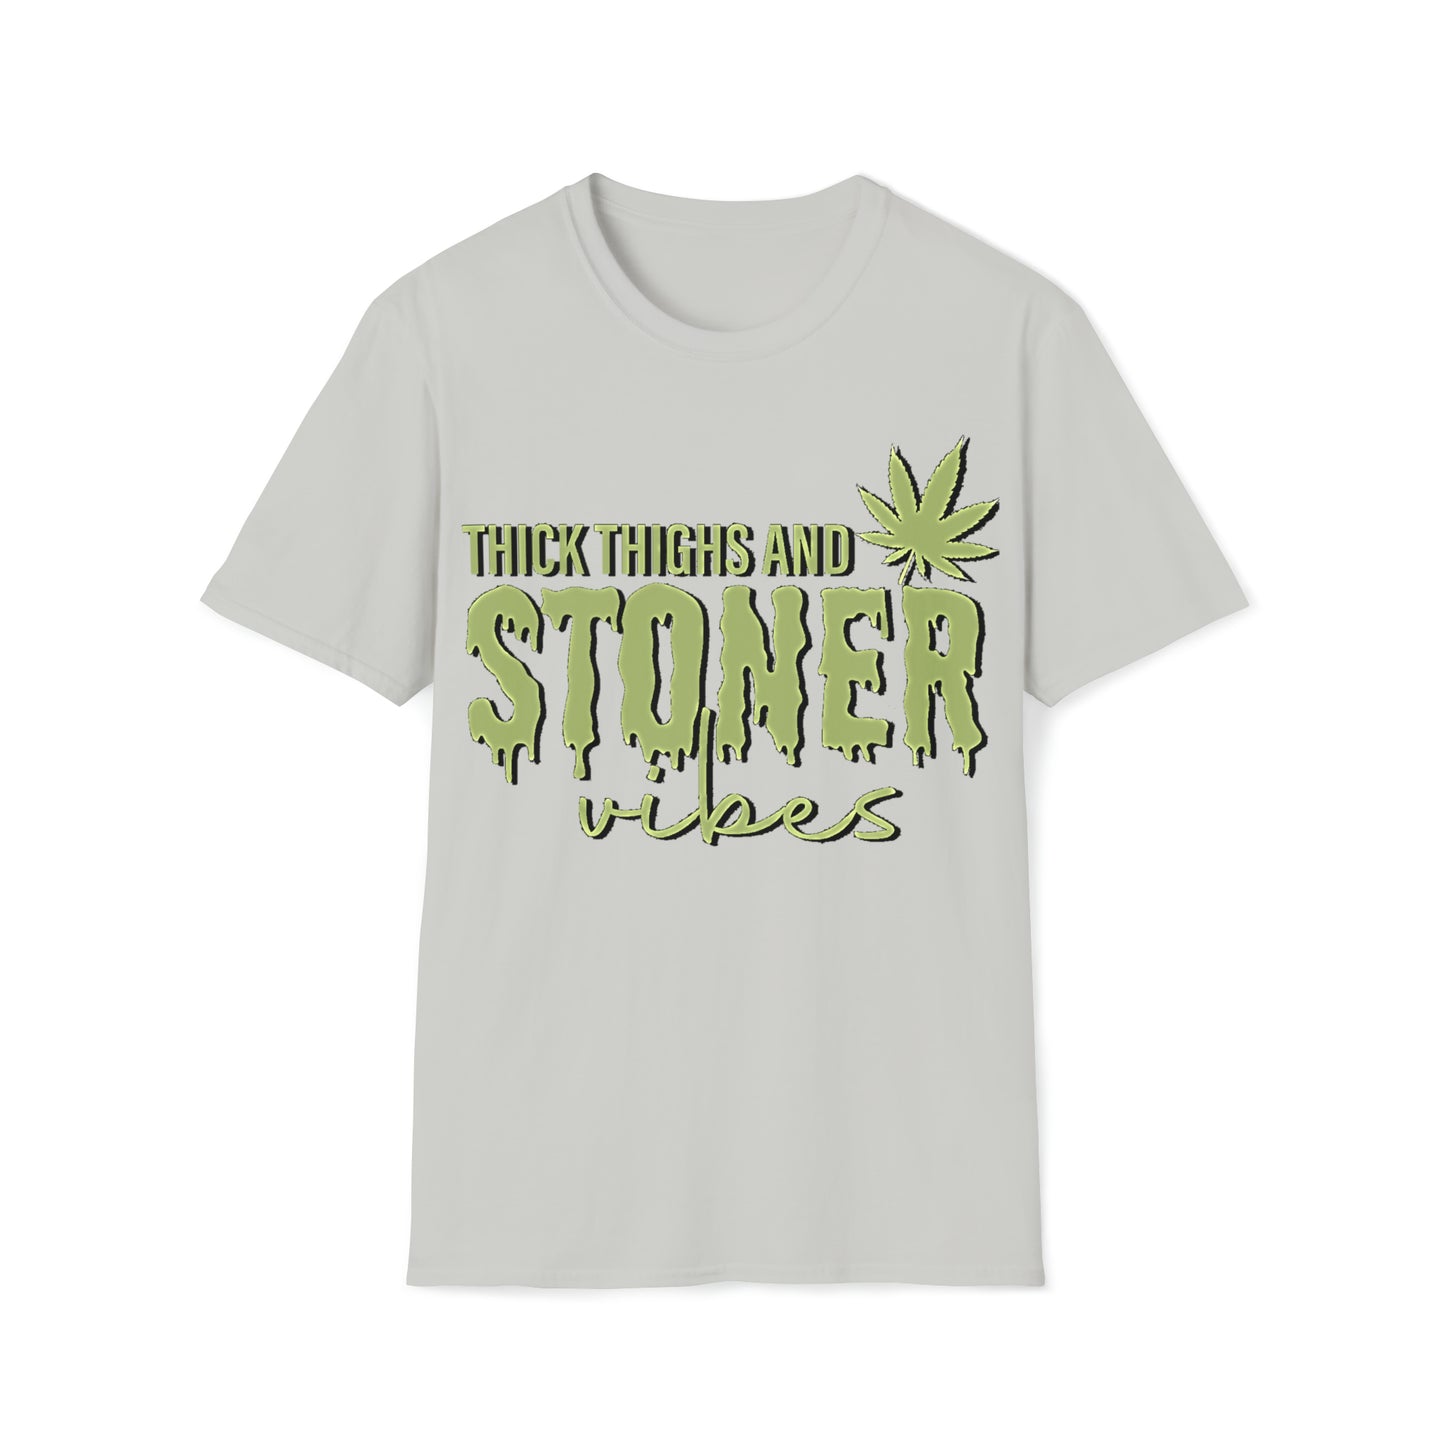 Thick Thighs Stoner Vibes Green Tee